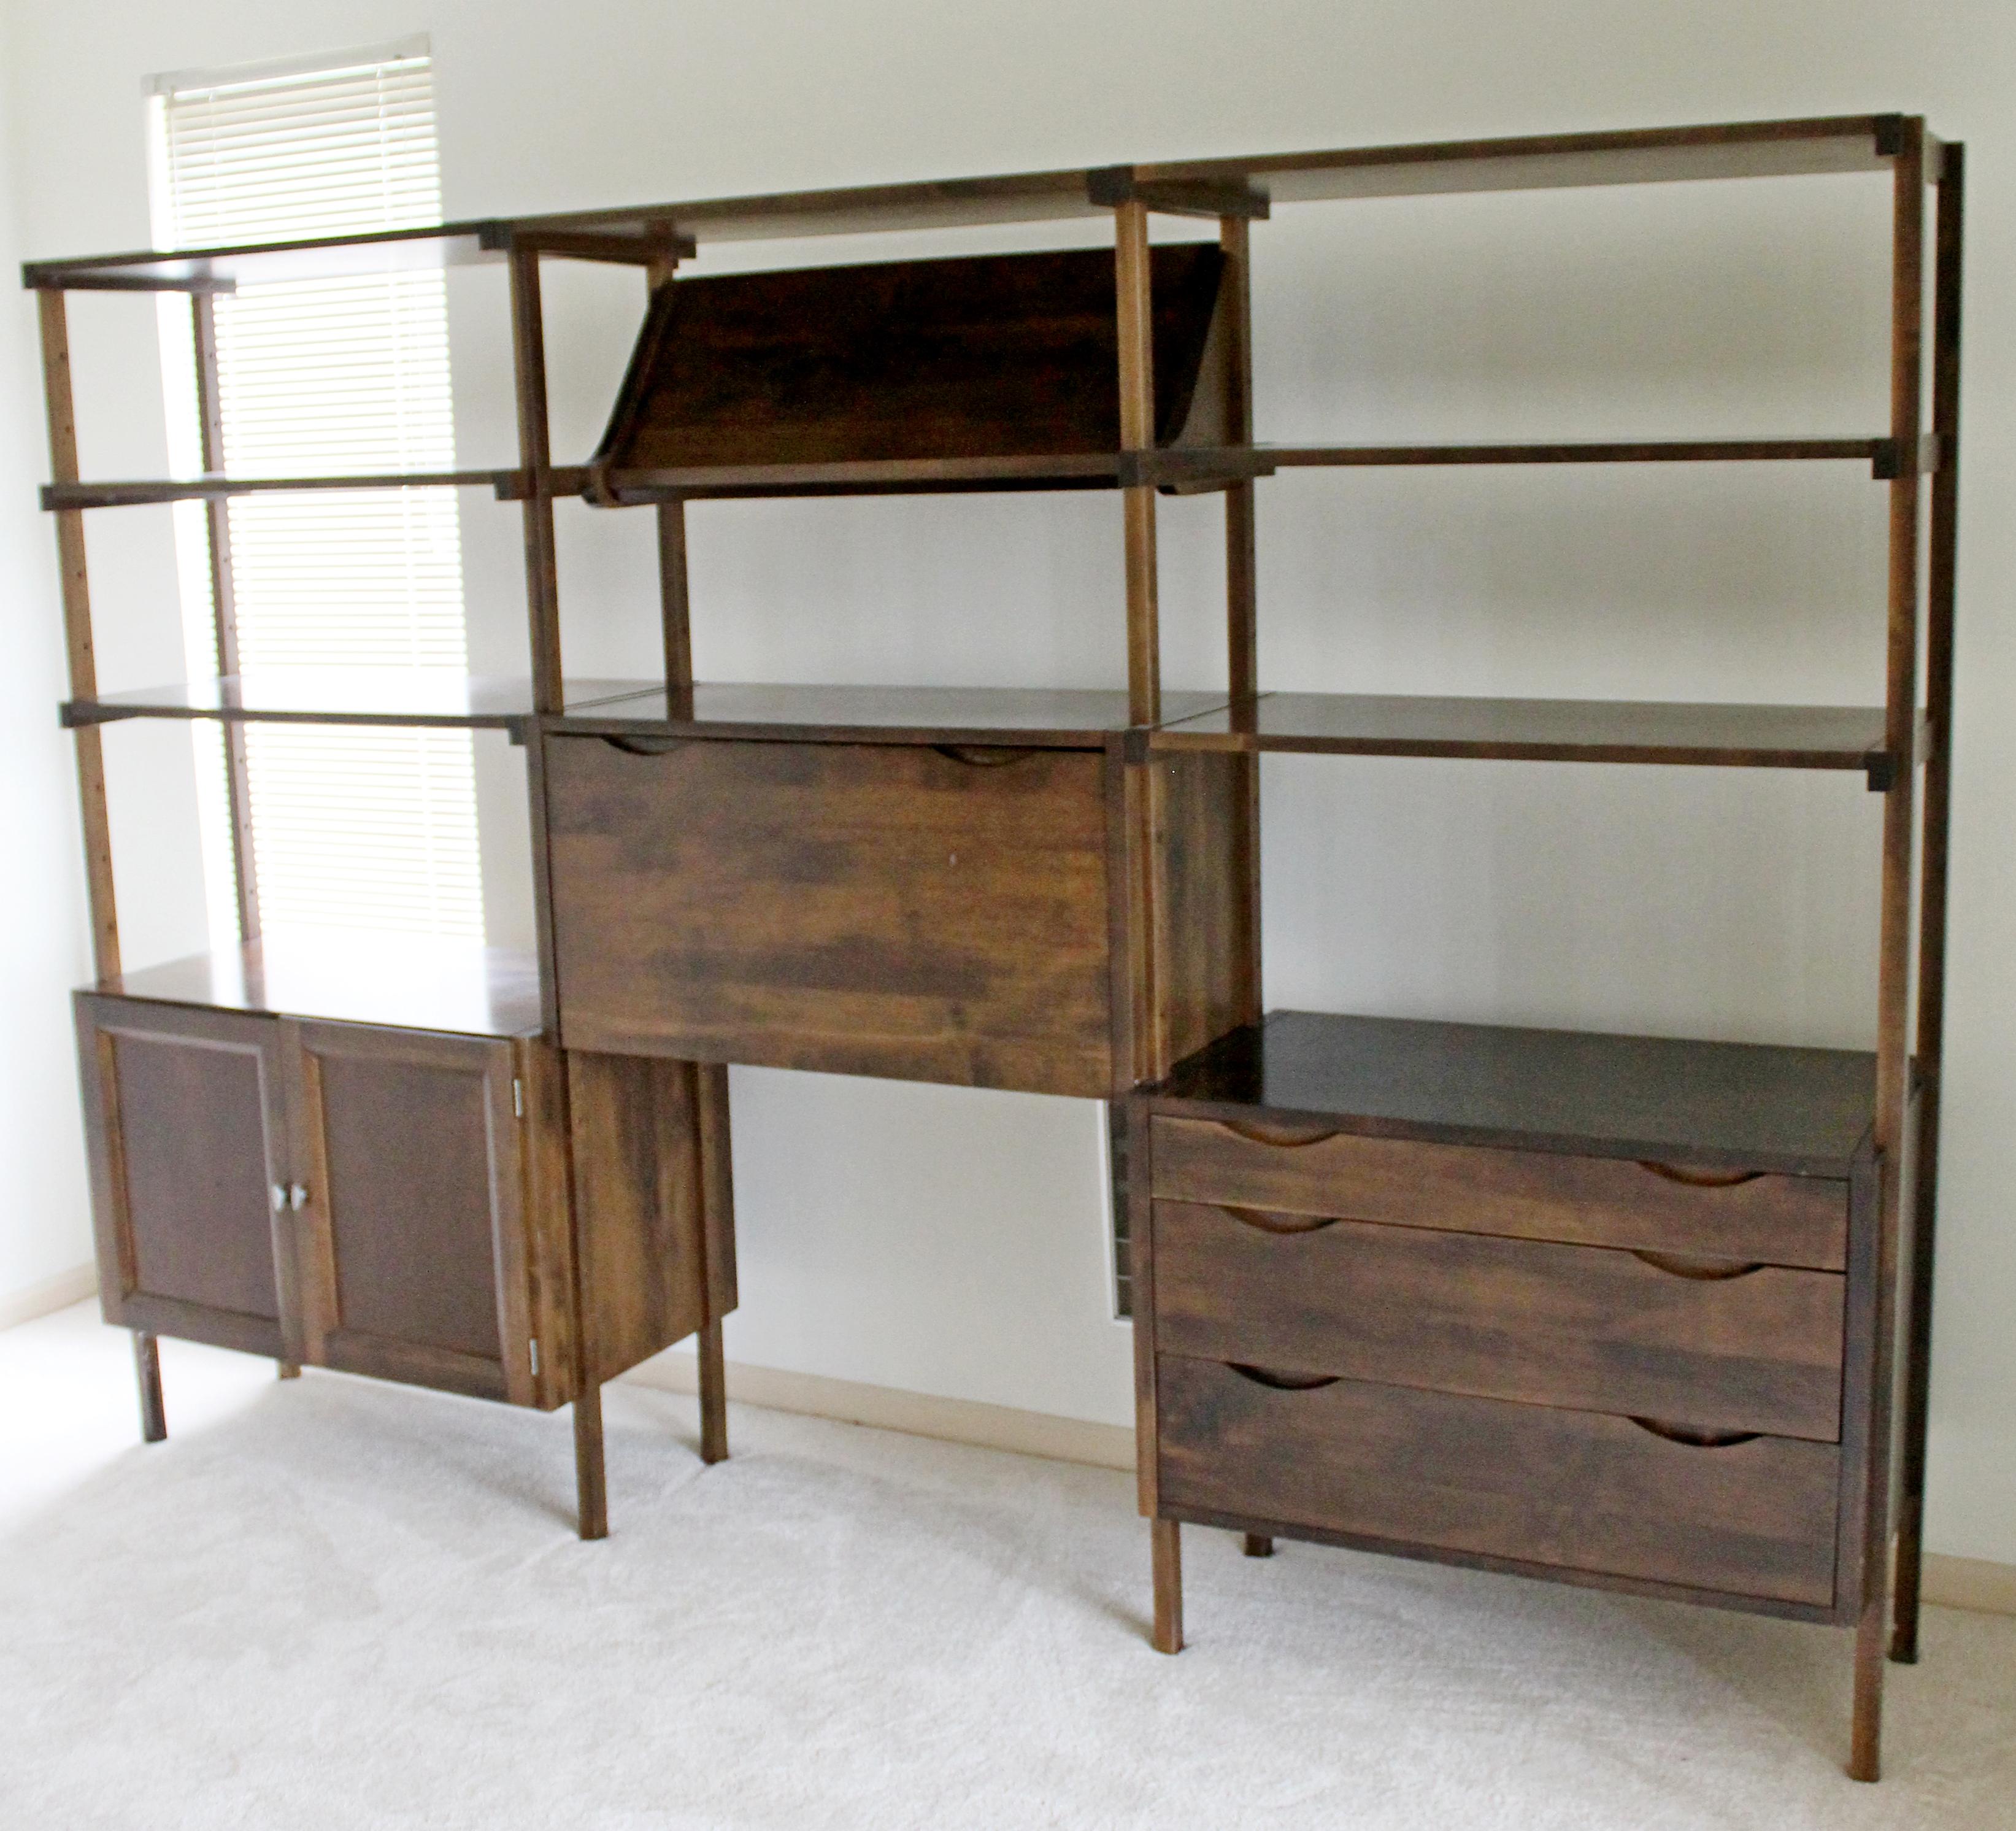 For your consideration is a wonderful walnut wood bookcase wall unit, with several compartments, cabinet, drawers, drop down desk, magazine rack and shelfs circa the 1960s. In good vintage condition. The dimensions are 97